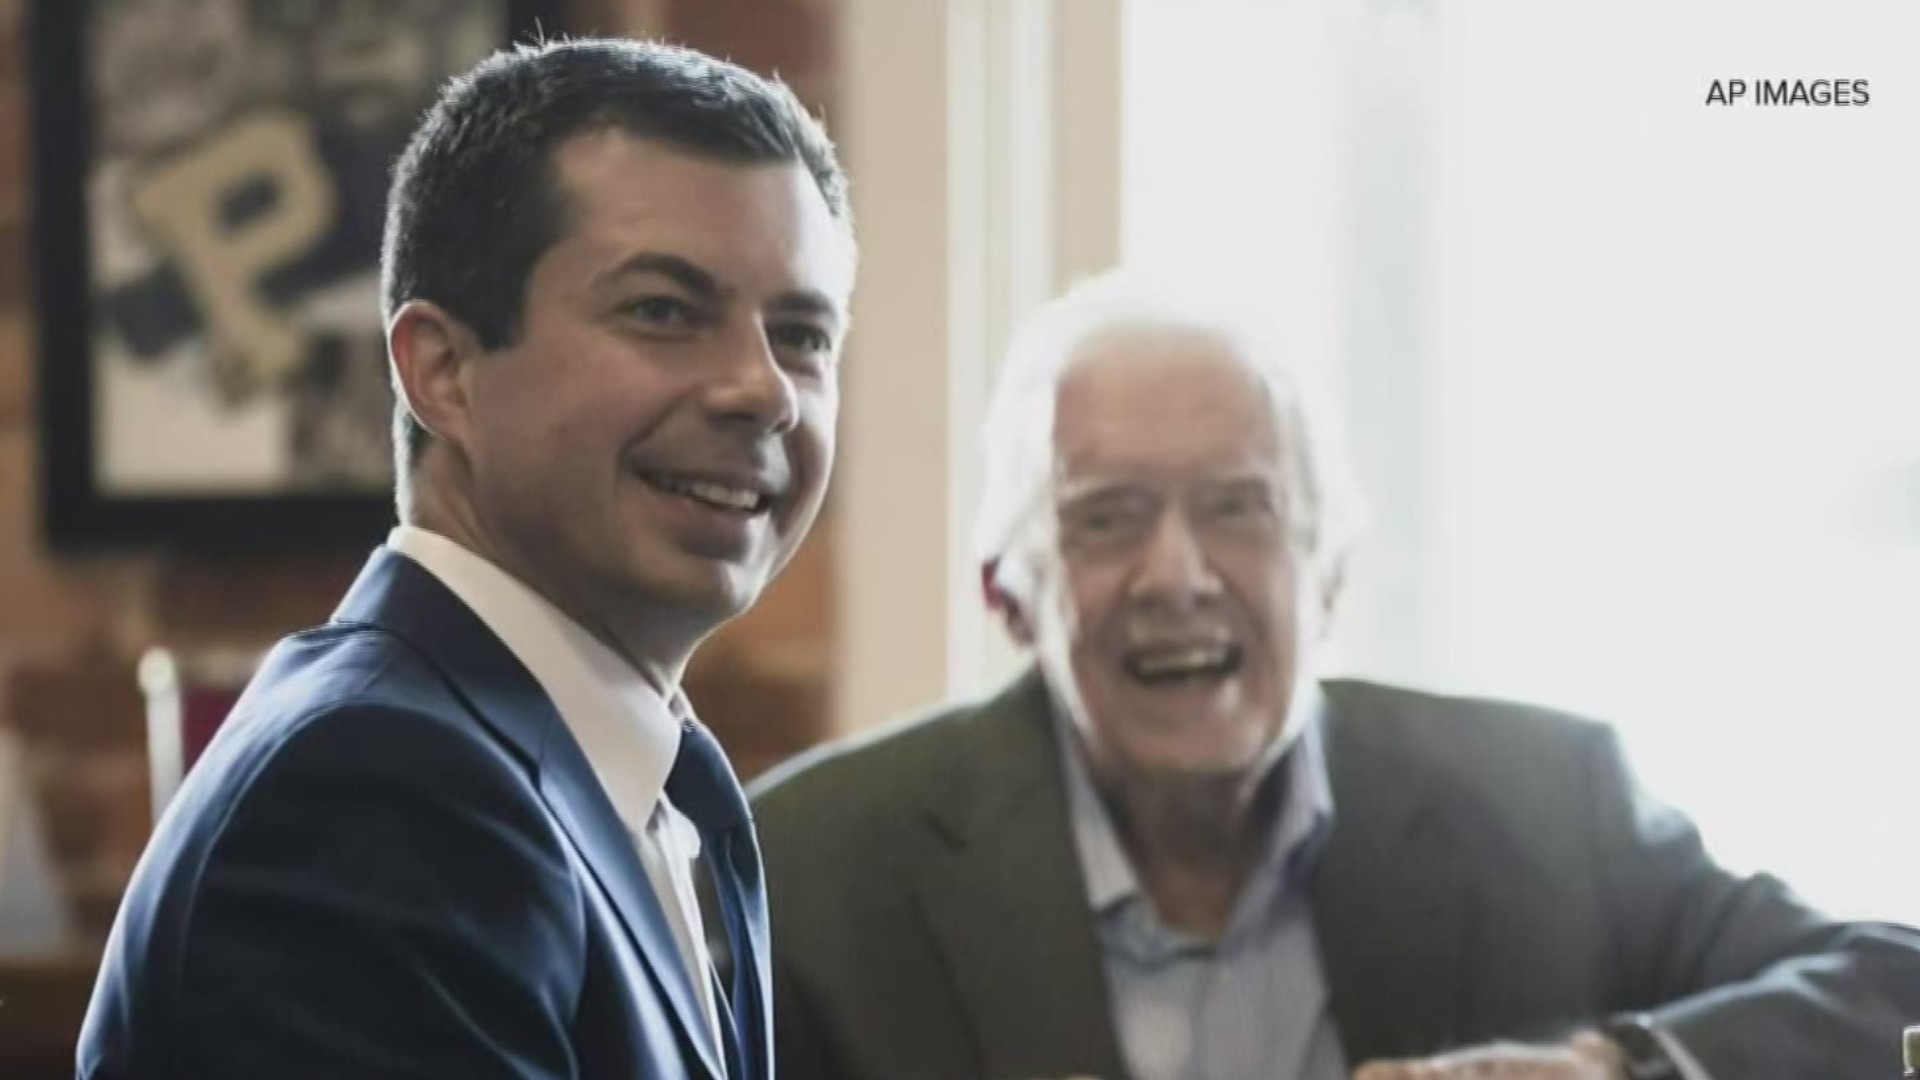 Jimmy and Rosalynn Carter were photographed at the Buffalo Cafe meeting with Pete and Chasten Buttigieg on Sunday.